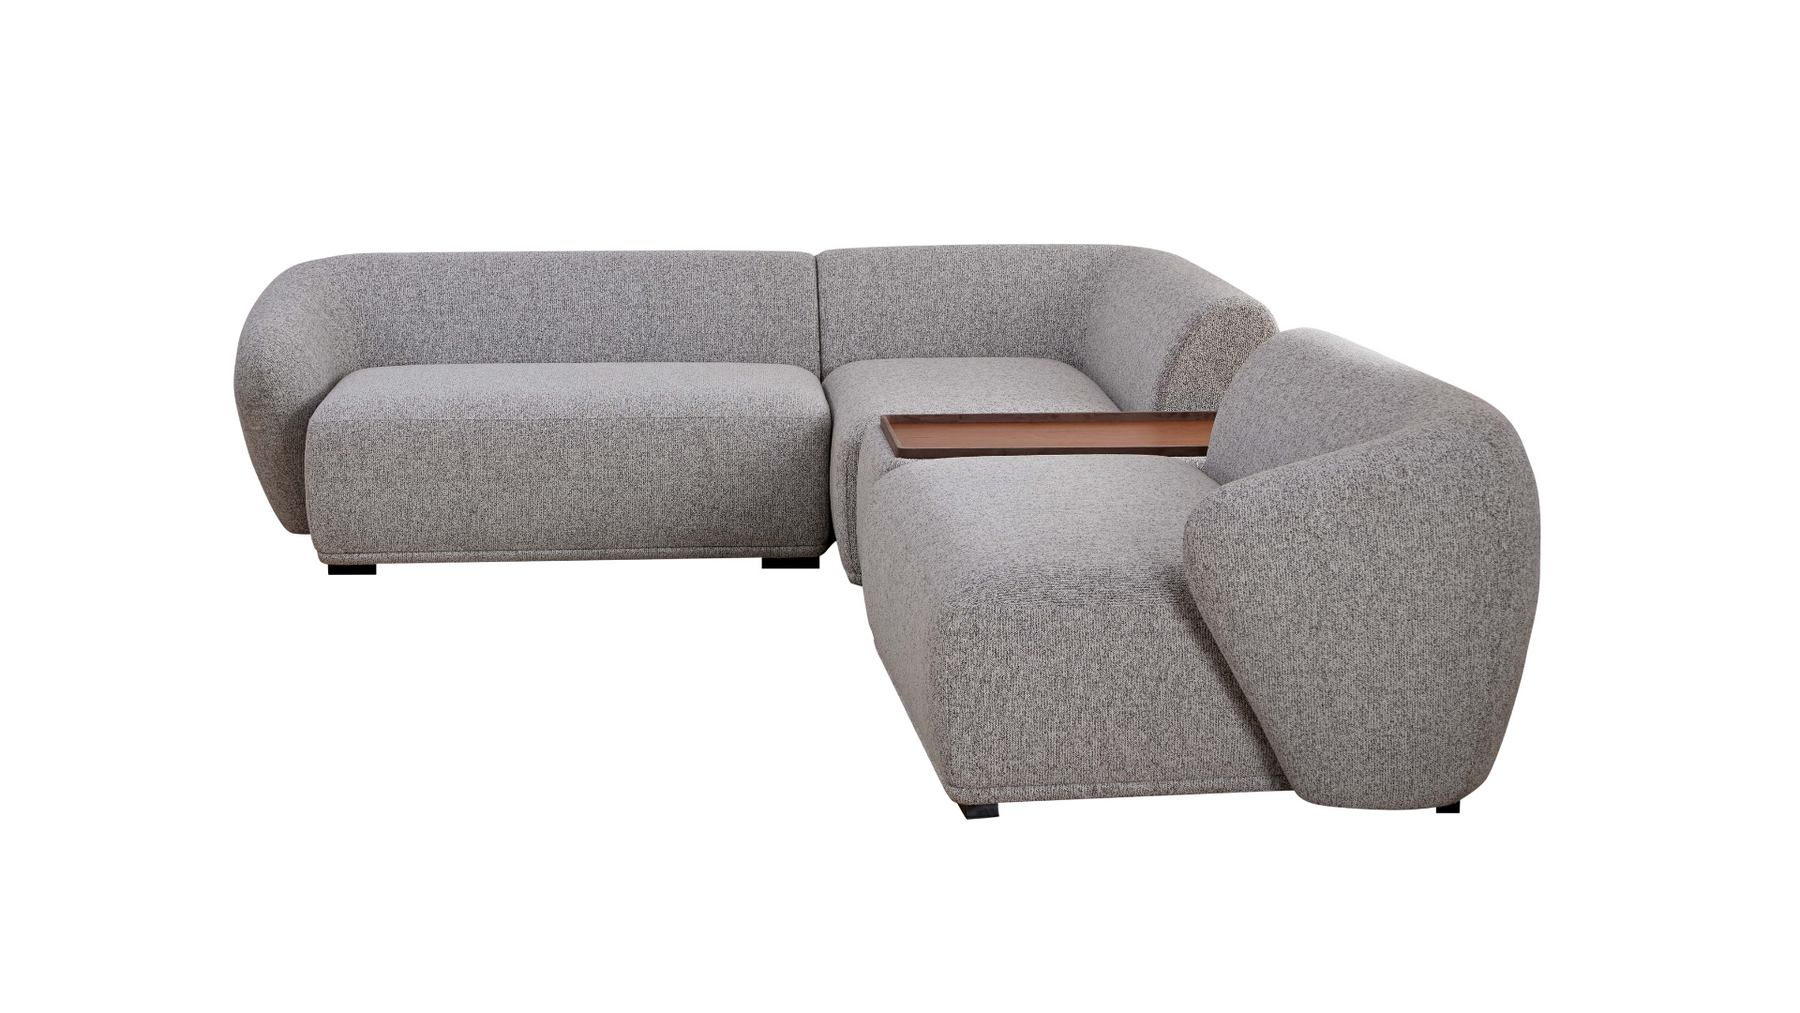 Charles Modular Sofa in Side View on White Background